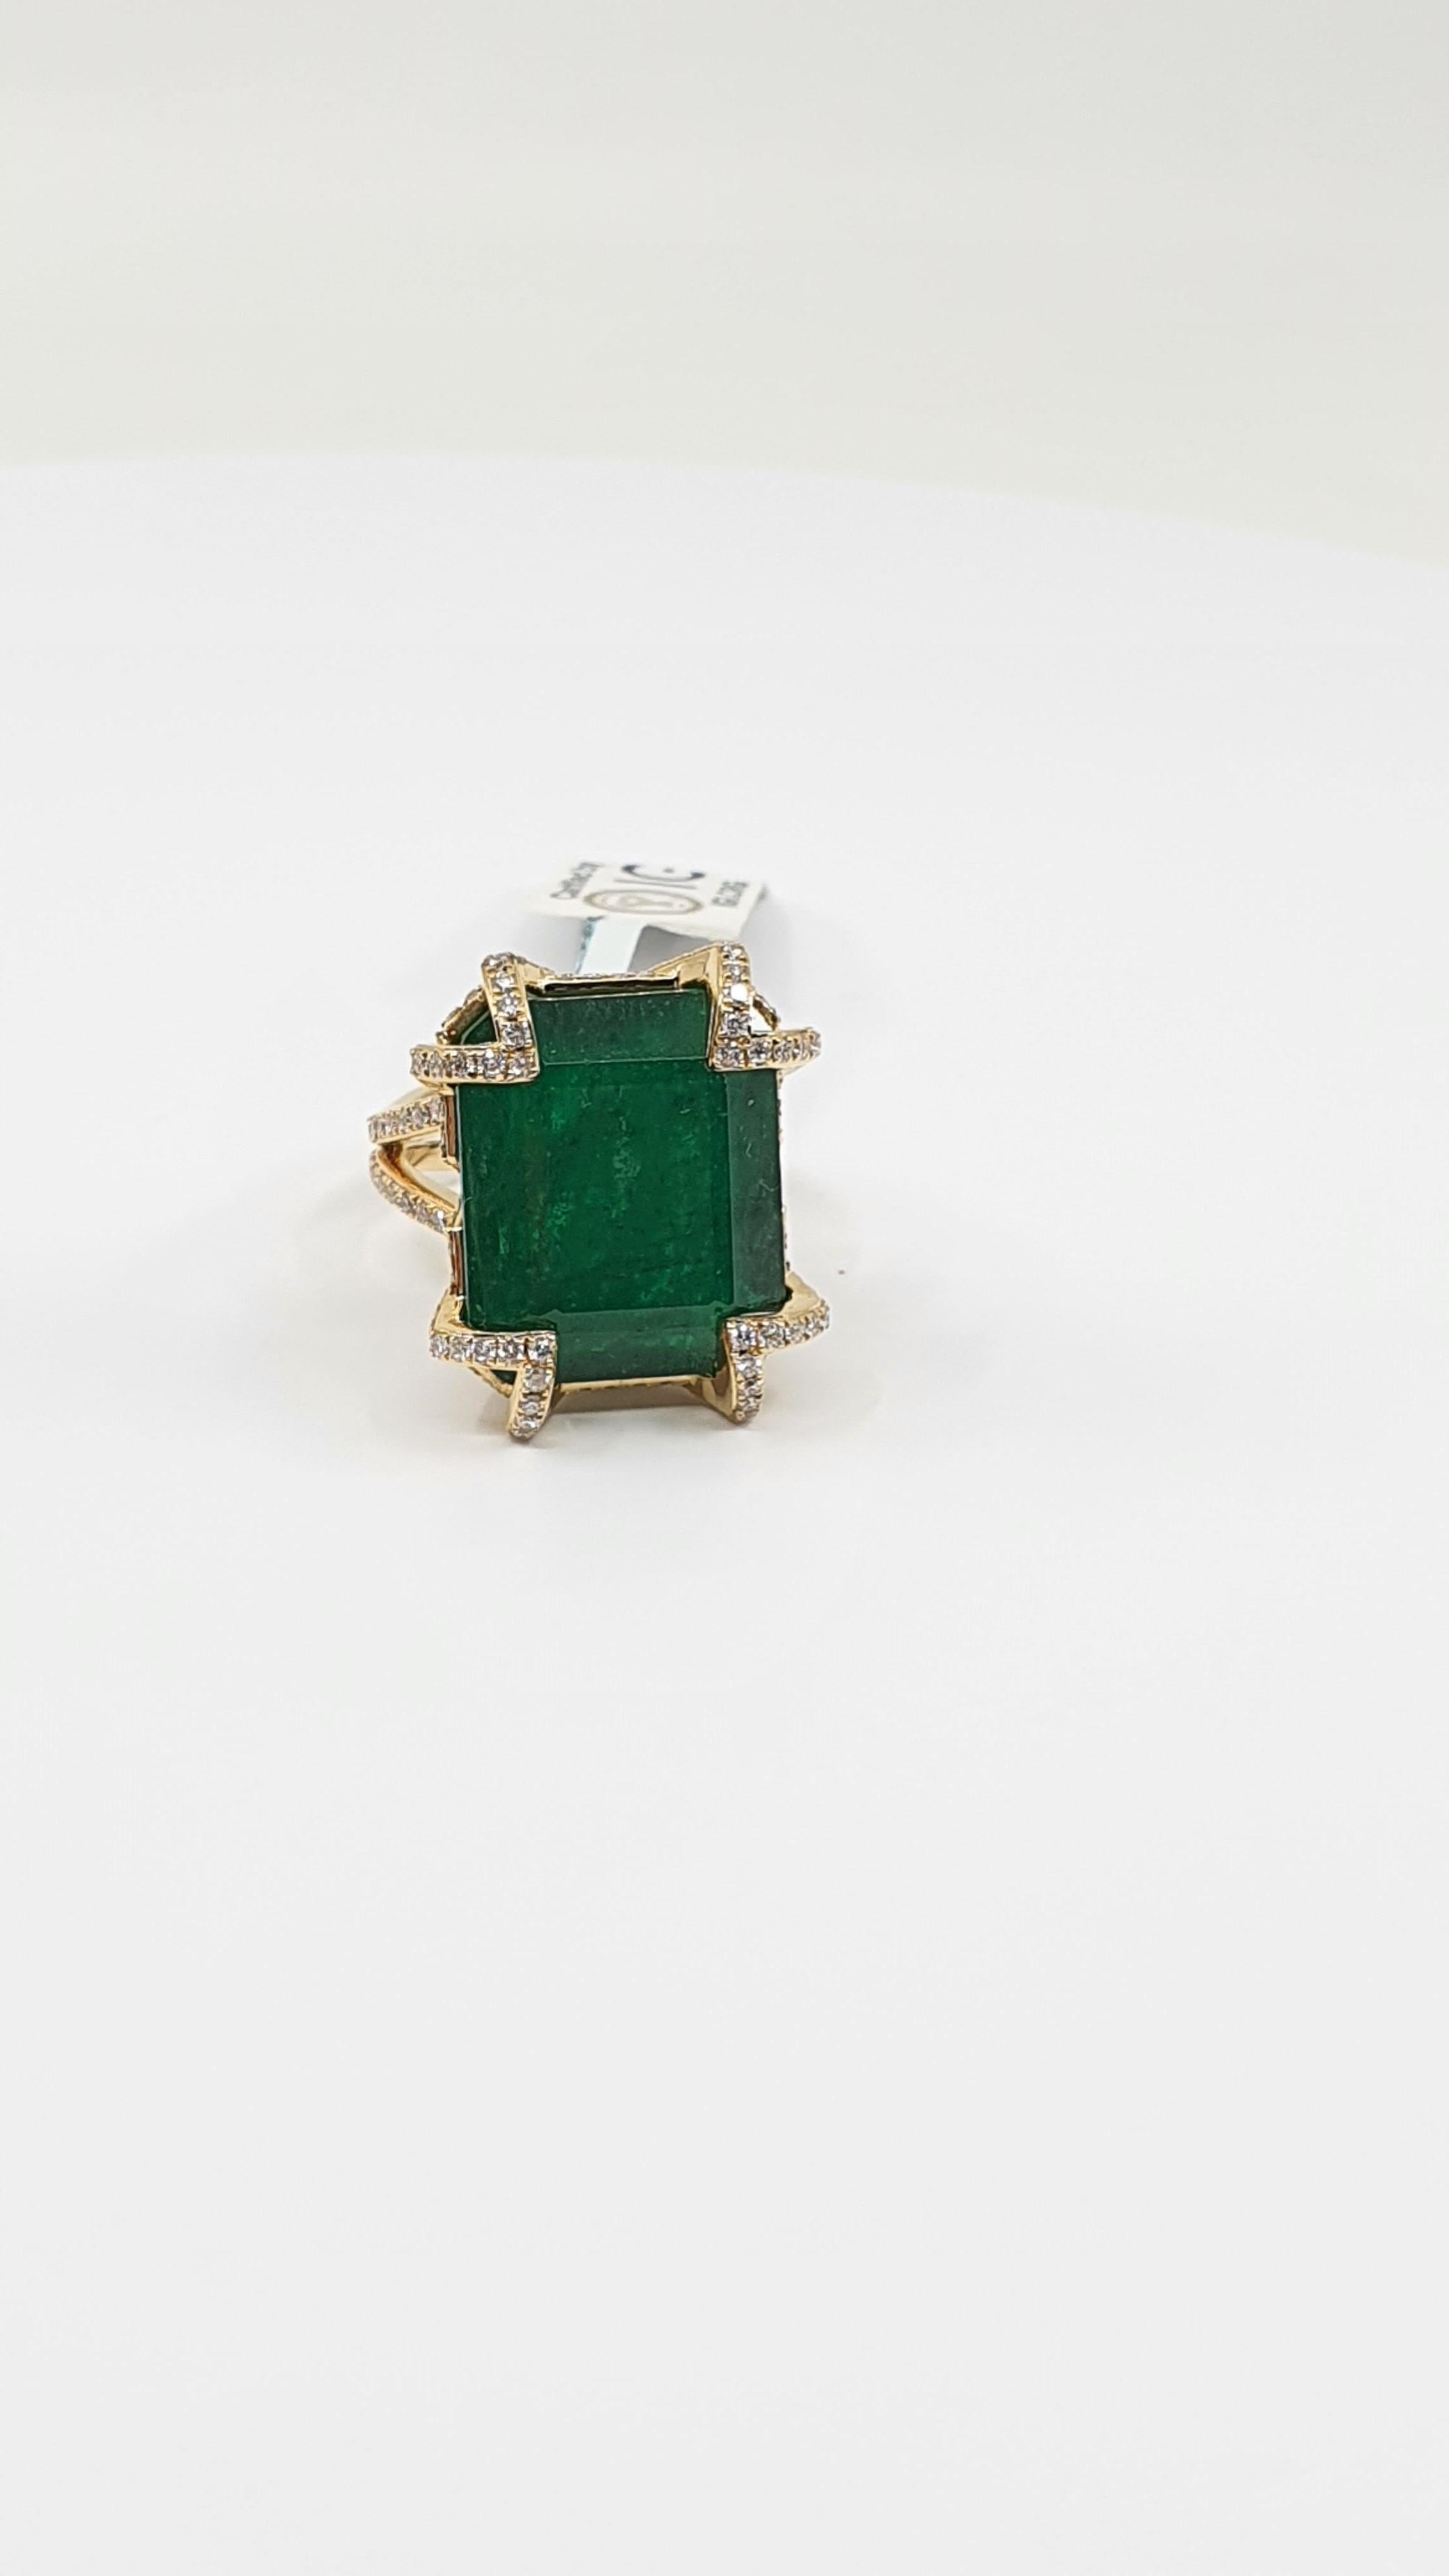 This stunning 22.29 Ct dark green square cut Emerald is a real treasure among gemstones. This precious stone is encrusted in 18 K yellow gold double ring with 210 inlaid round cut diamonds. The giant emerald is beautifully hugged with golden corners